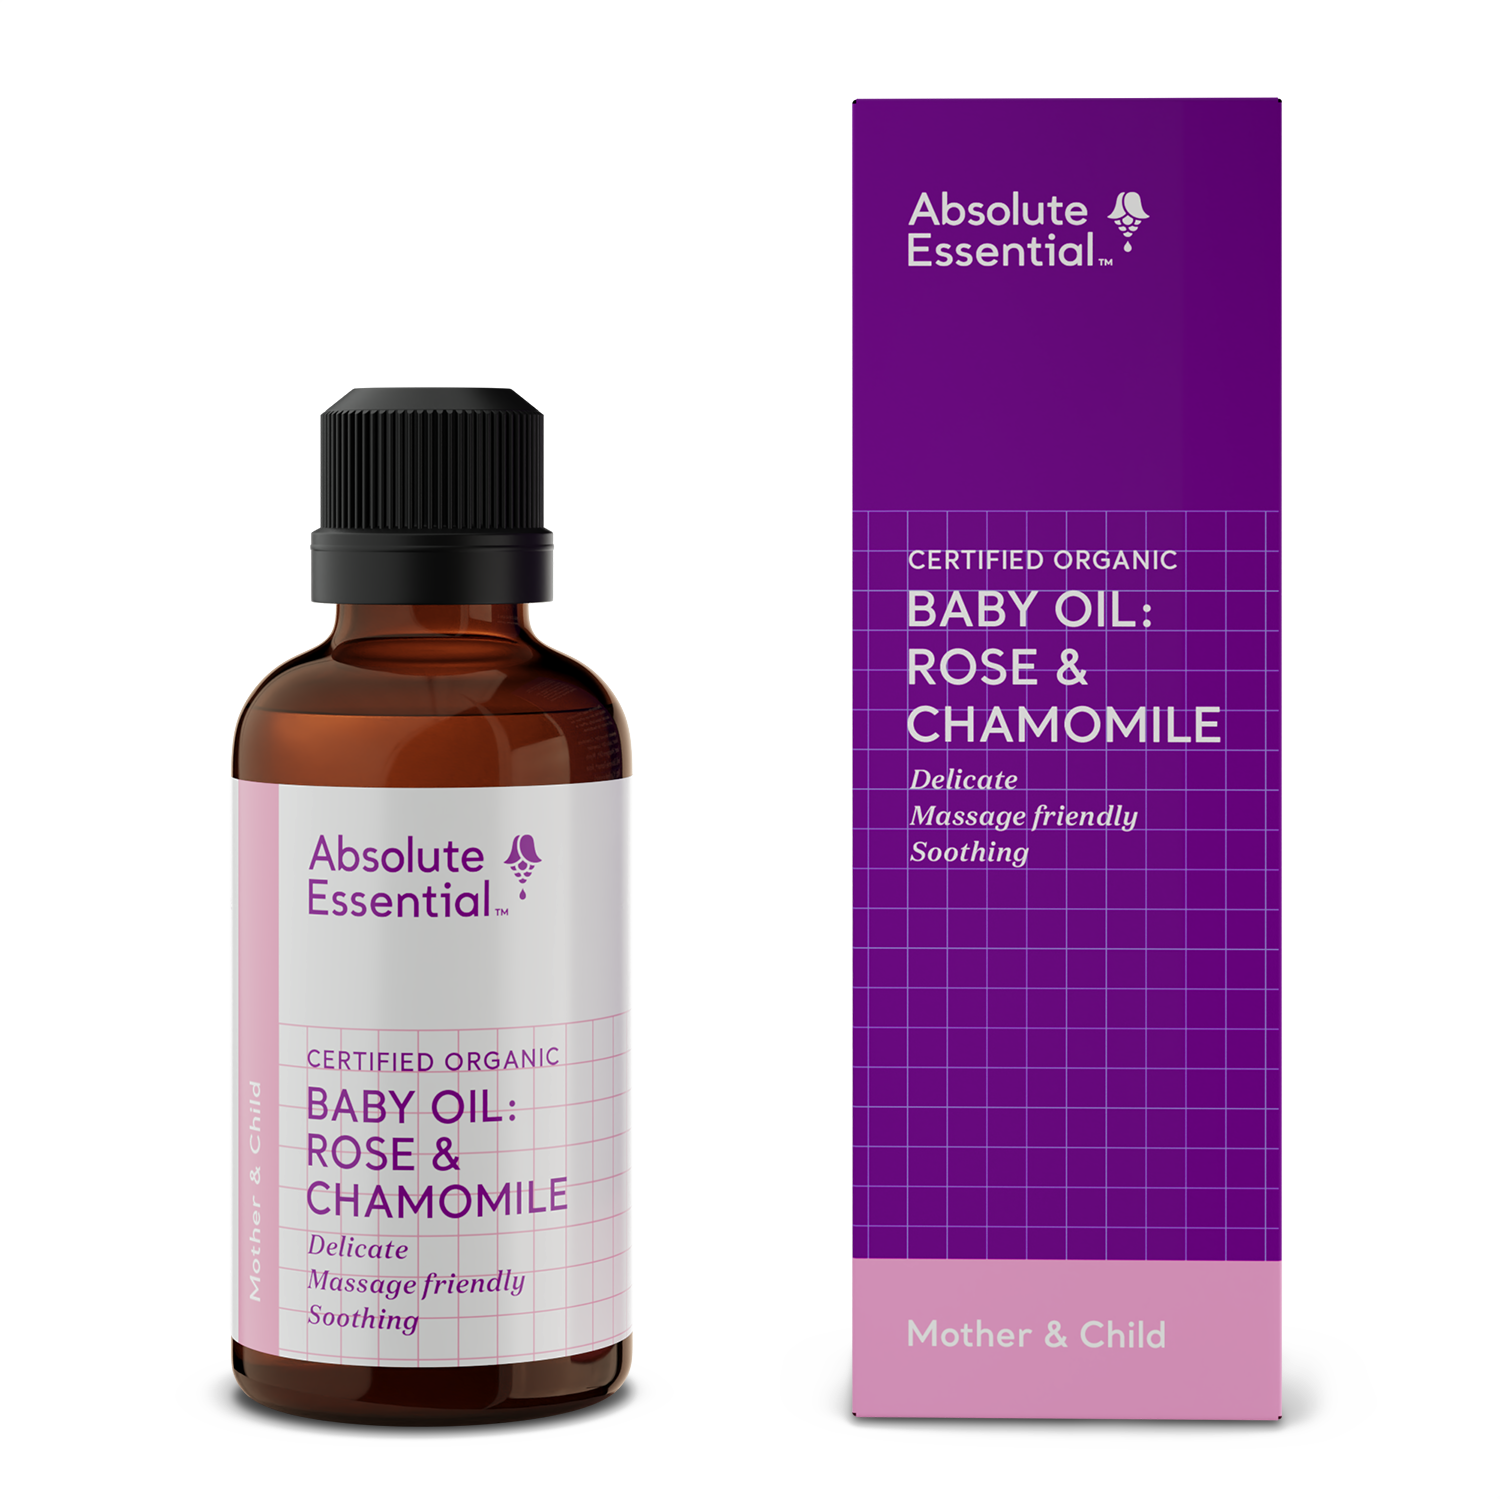 Baby Oil: Rose & Chamomile Essential Oil Blend